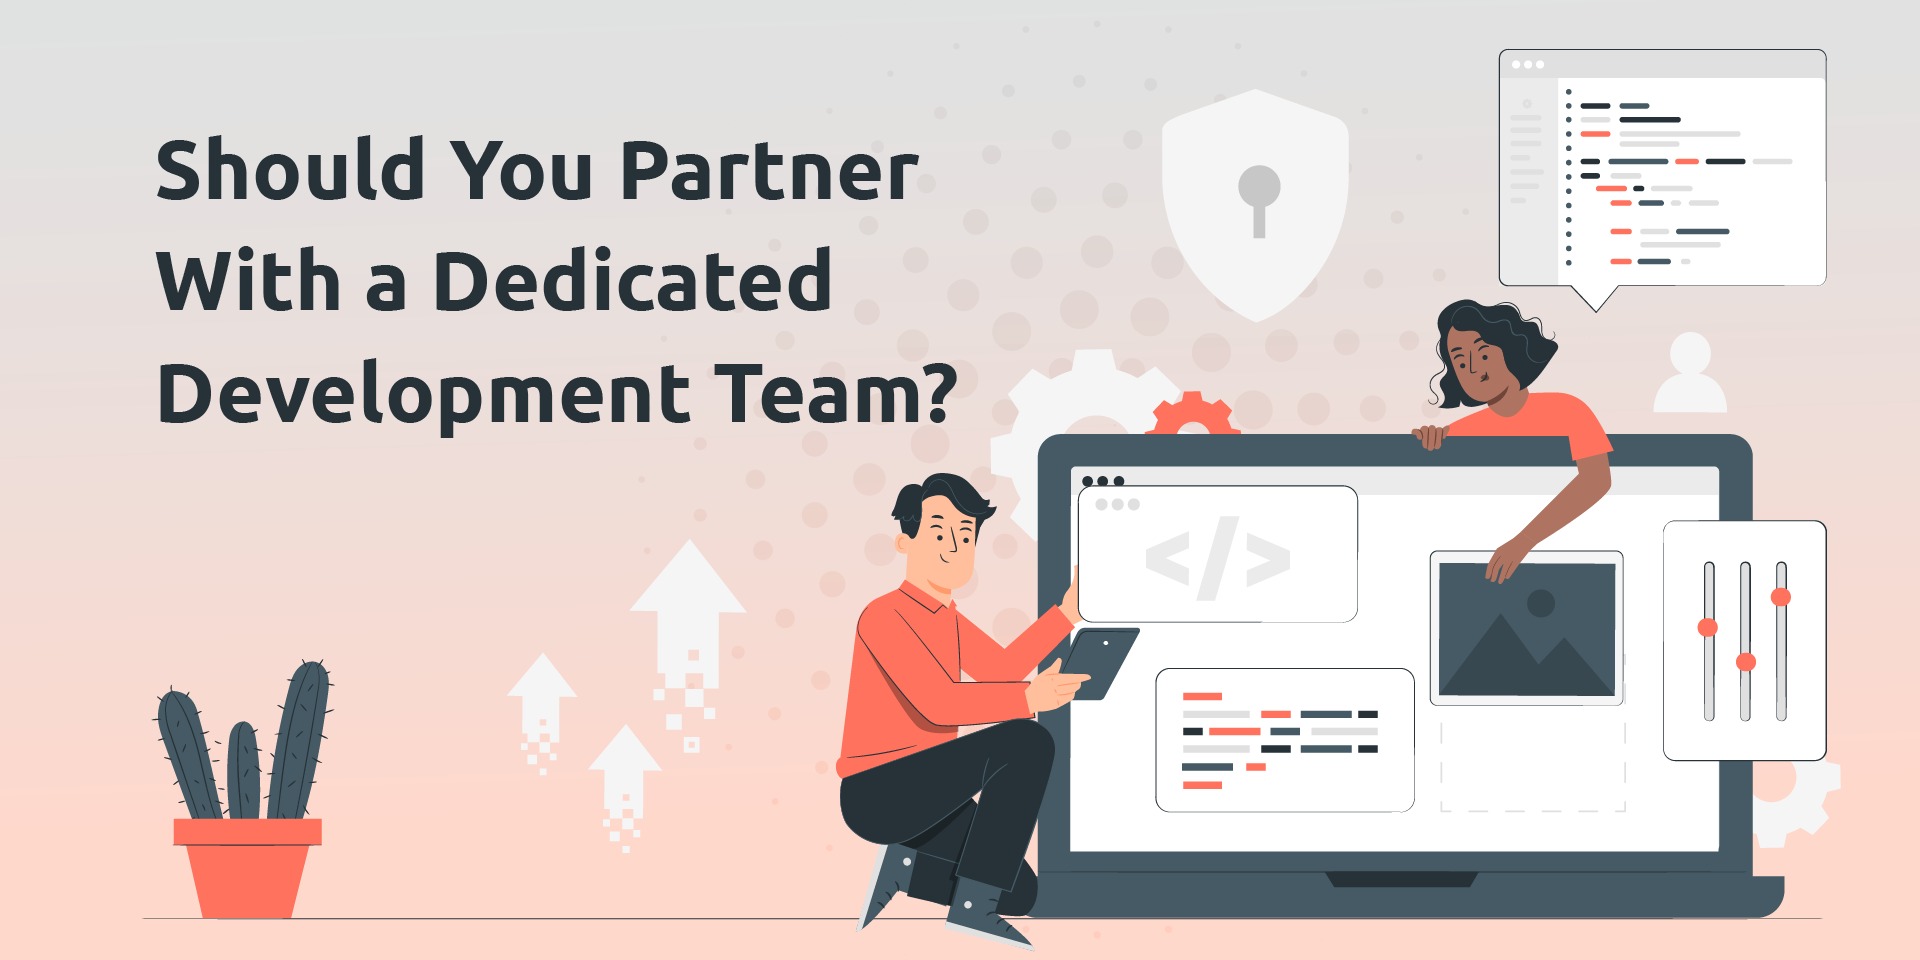 How, Why And When Should Your Partner With a Dedicated Development Team